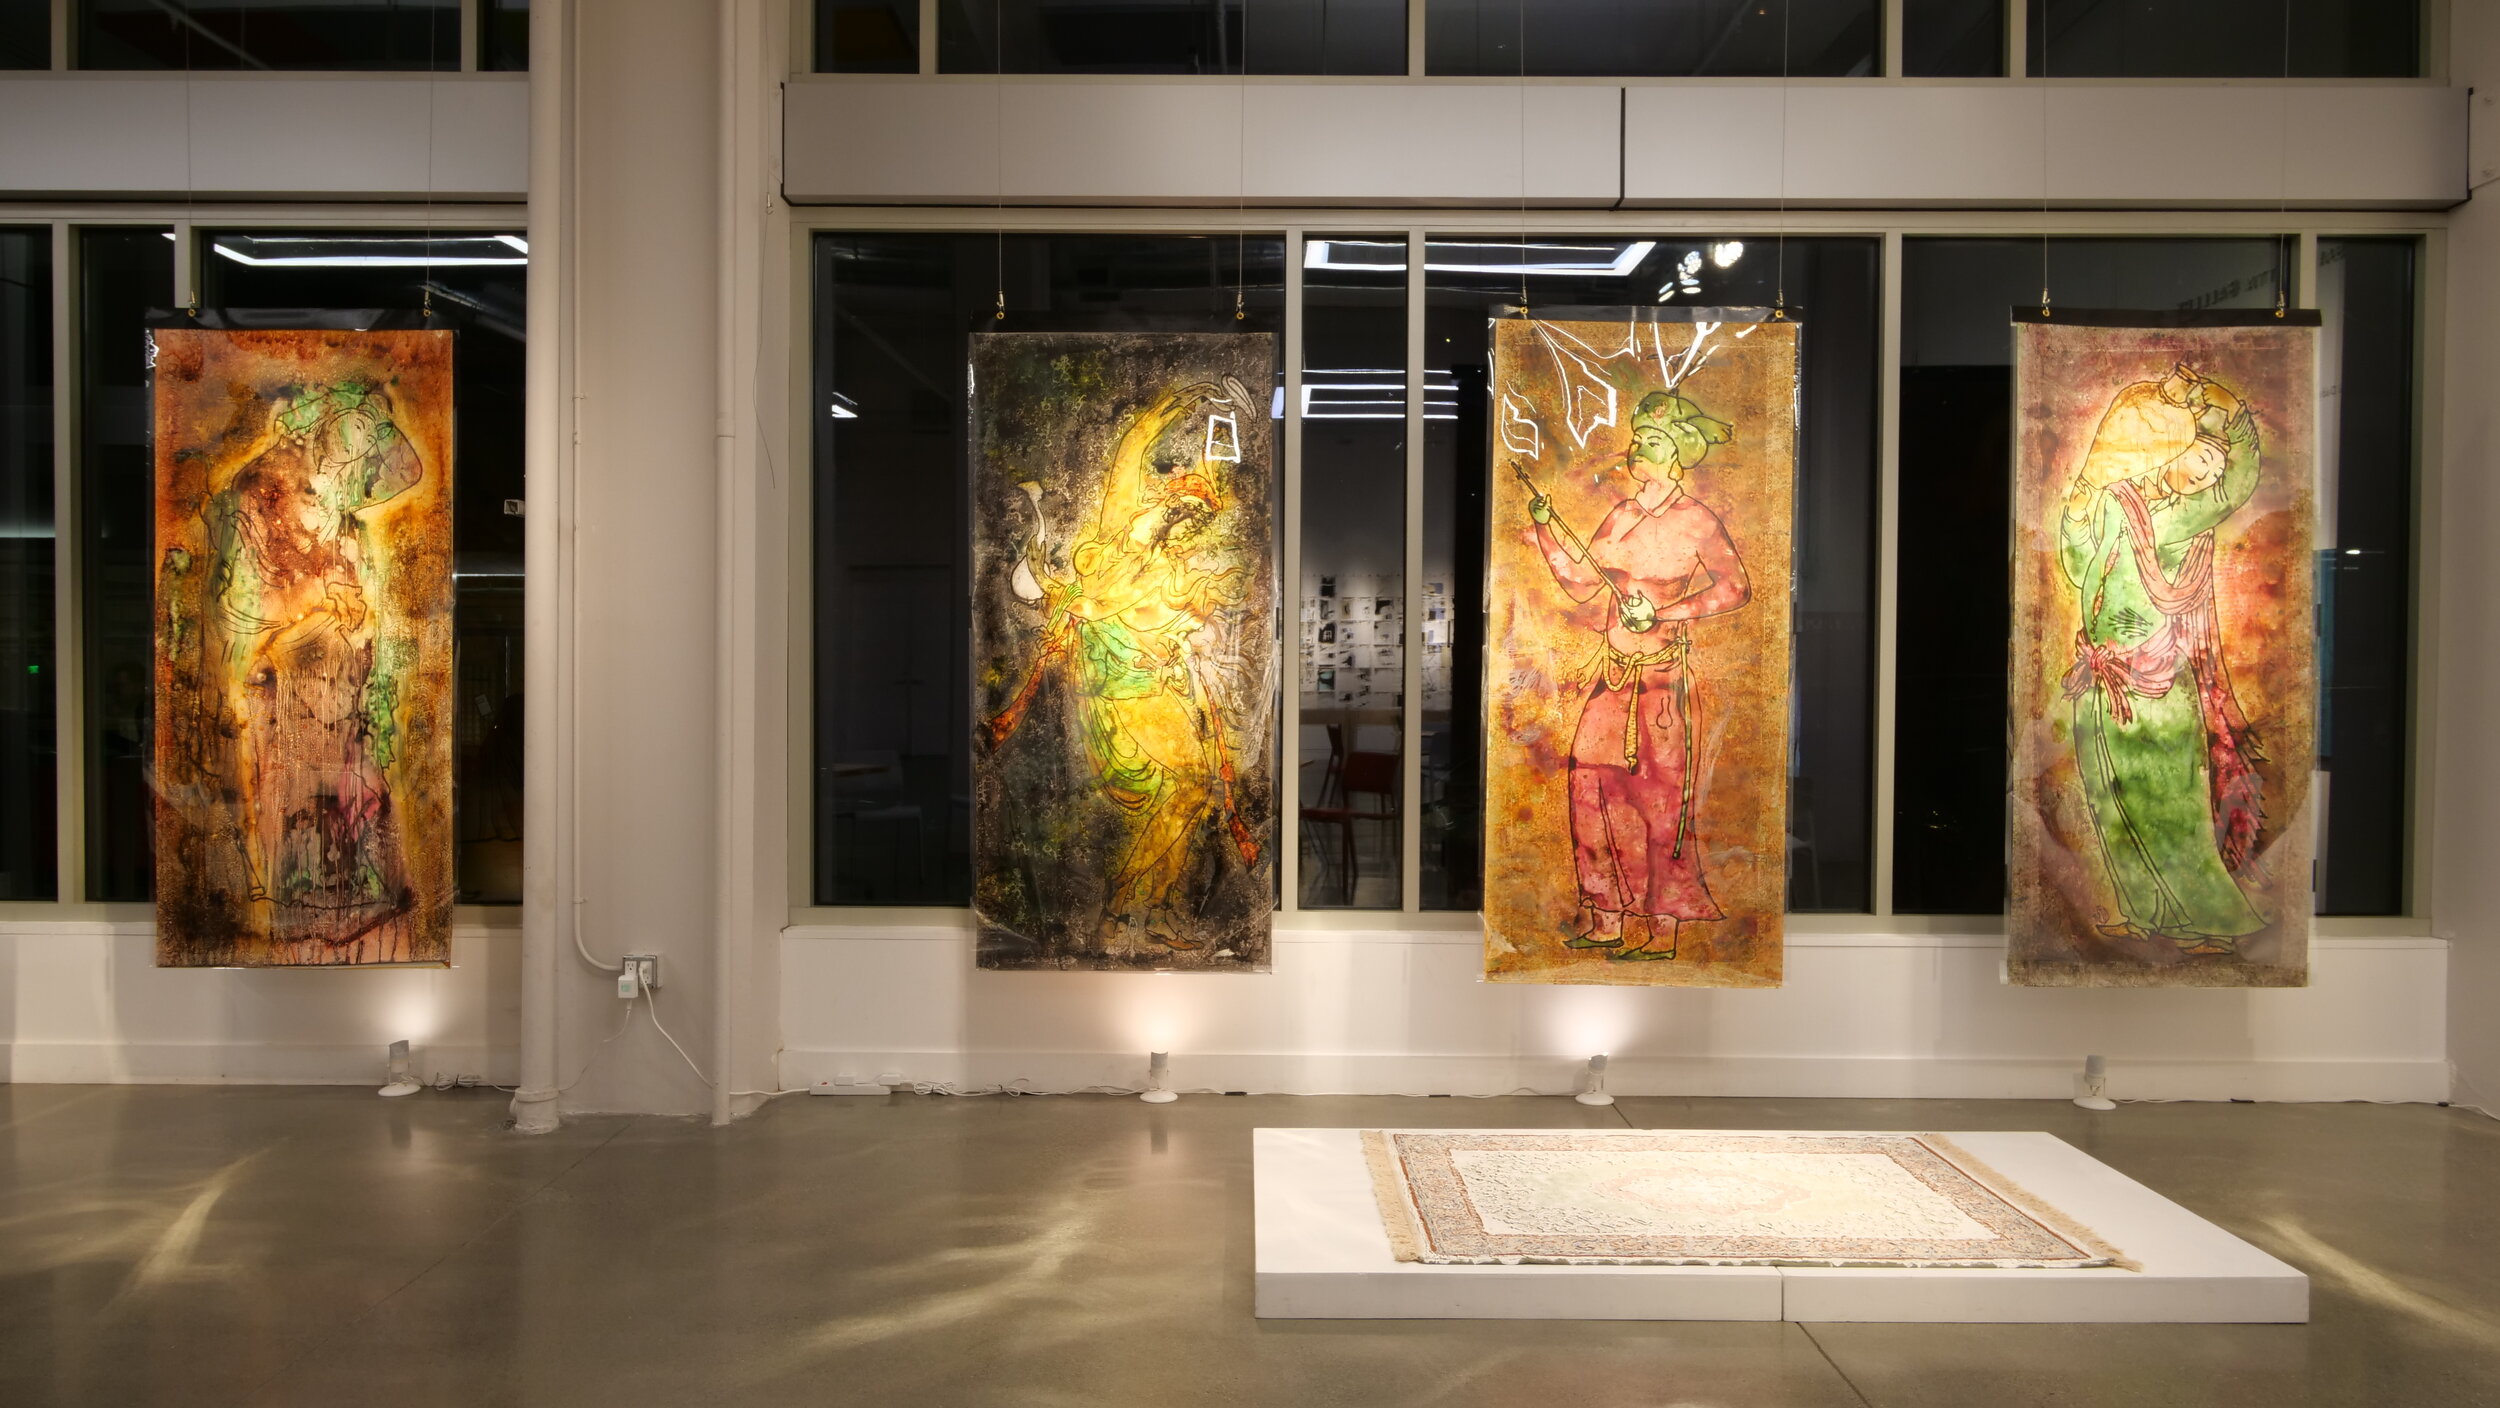 Four large panels of life-size human figures hang in the front windows.  A platform with a rug atop it sits in the foreground. (Copy)